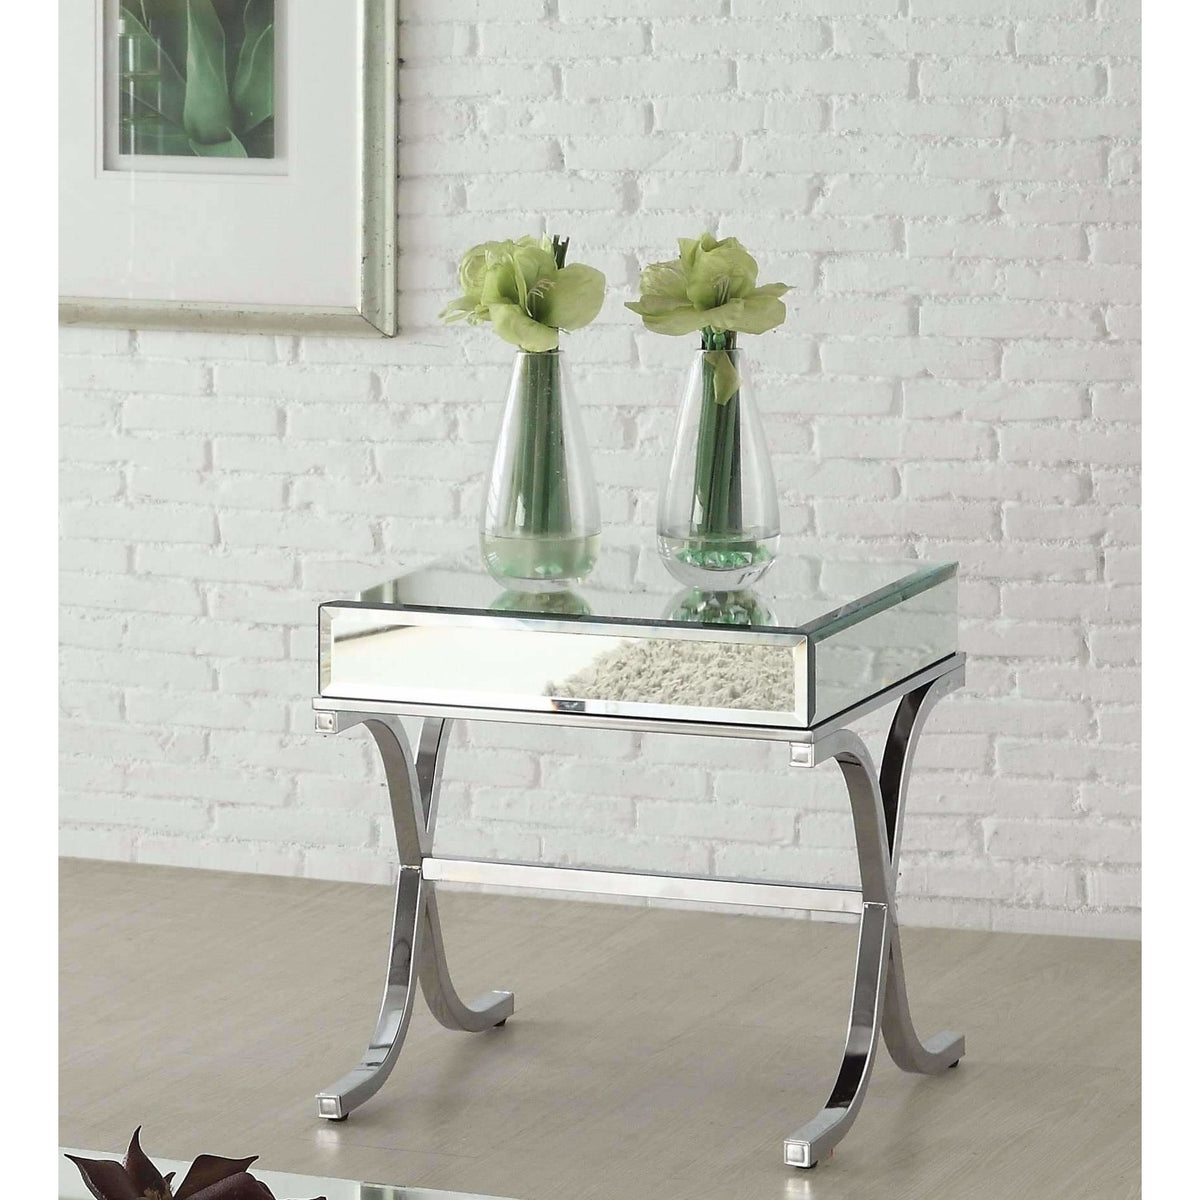 Mirrored Side Table,mirrored table,Adley & Company Inc.